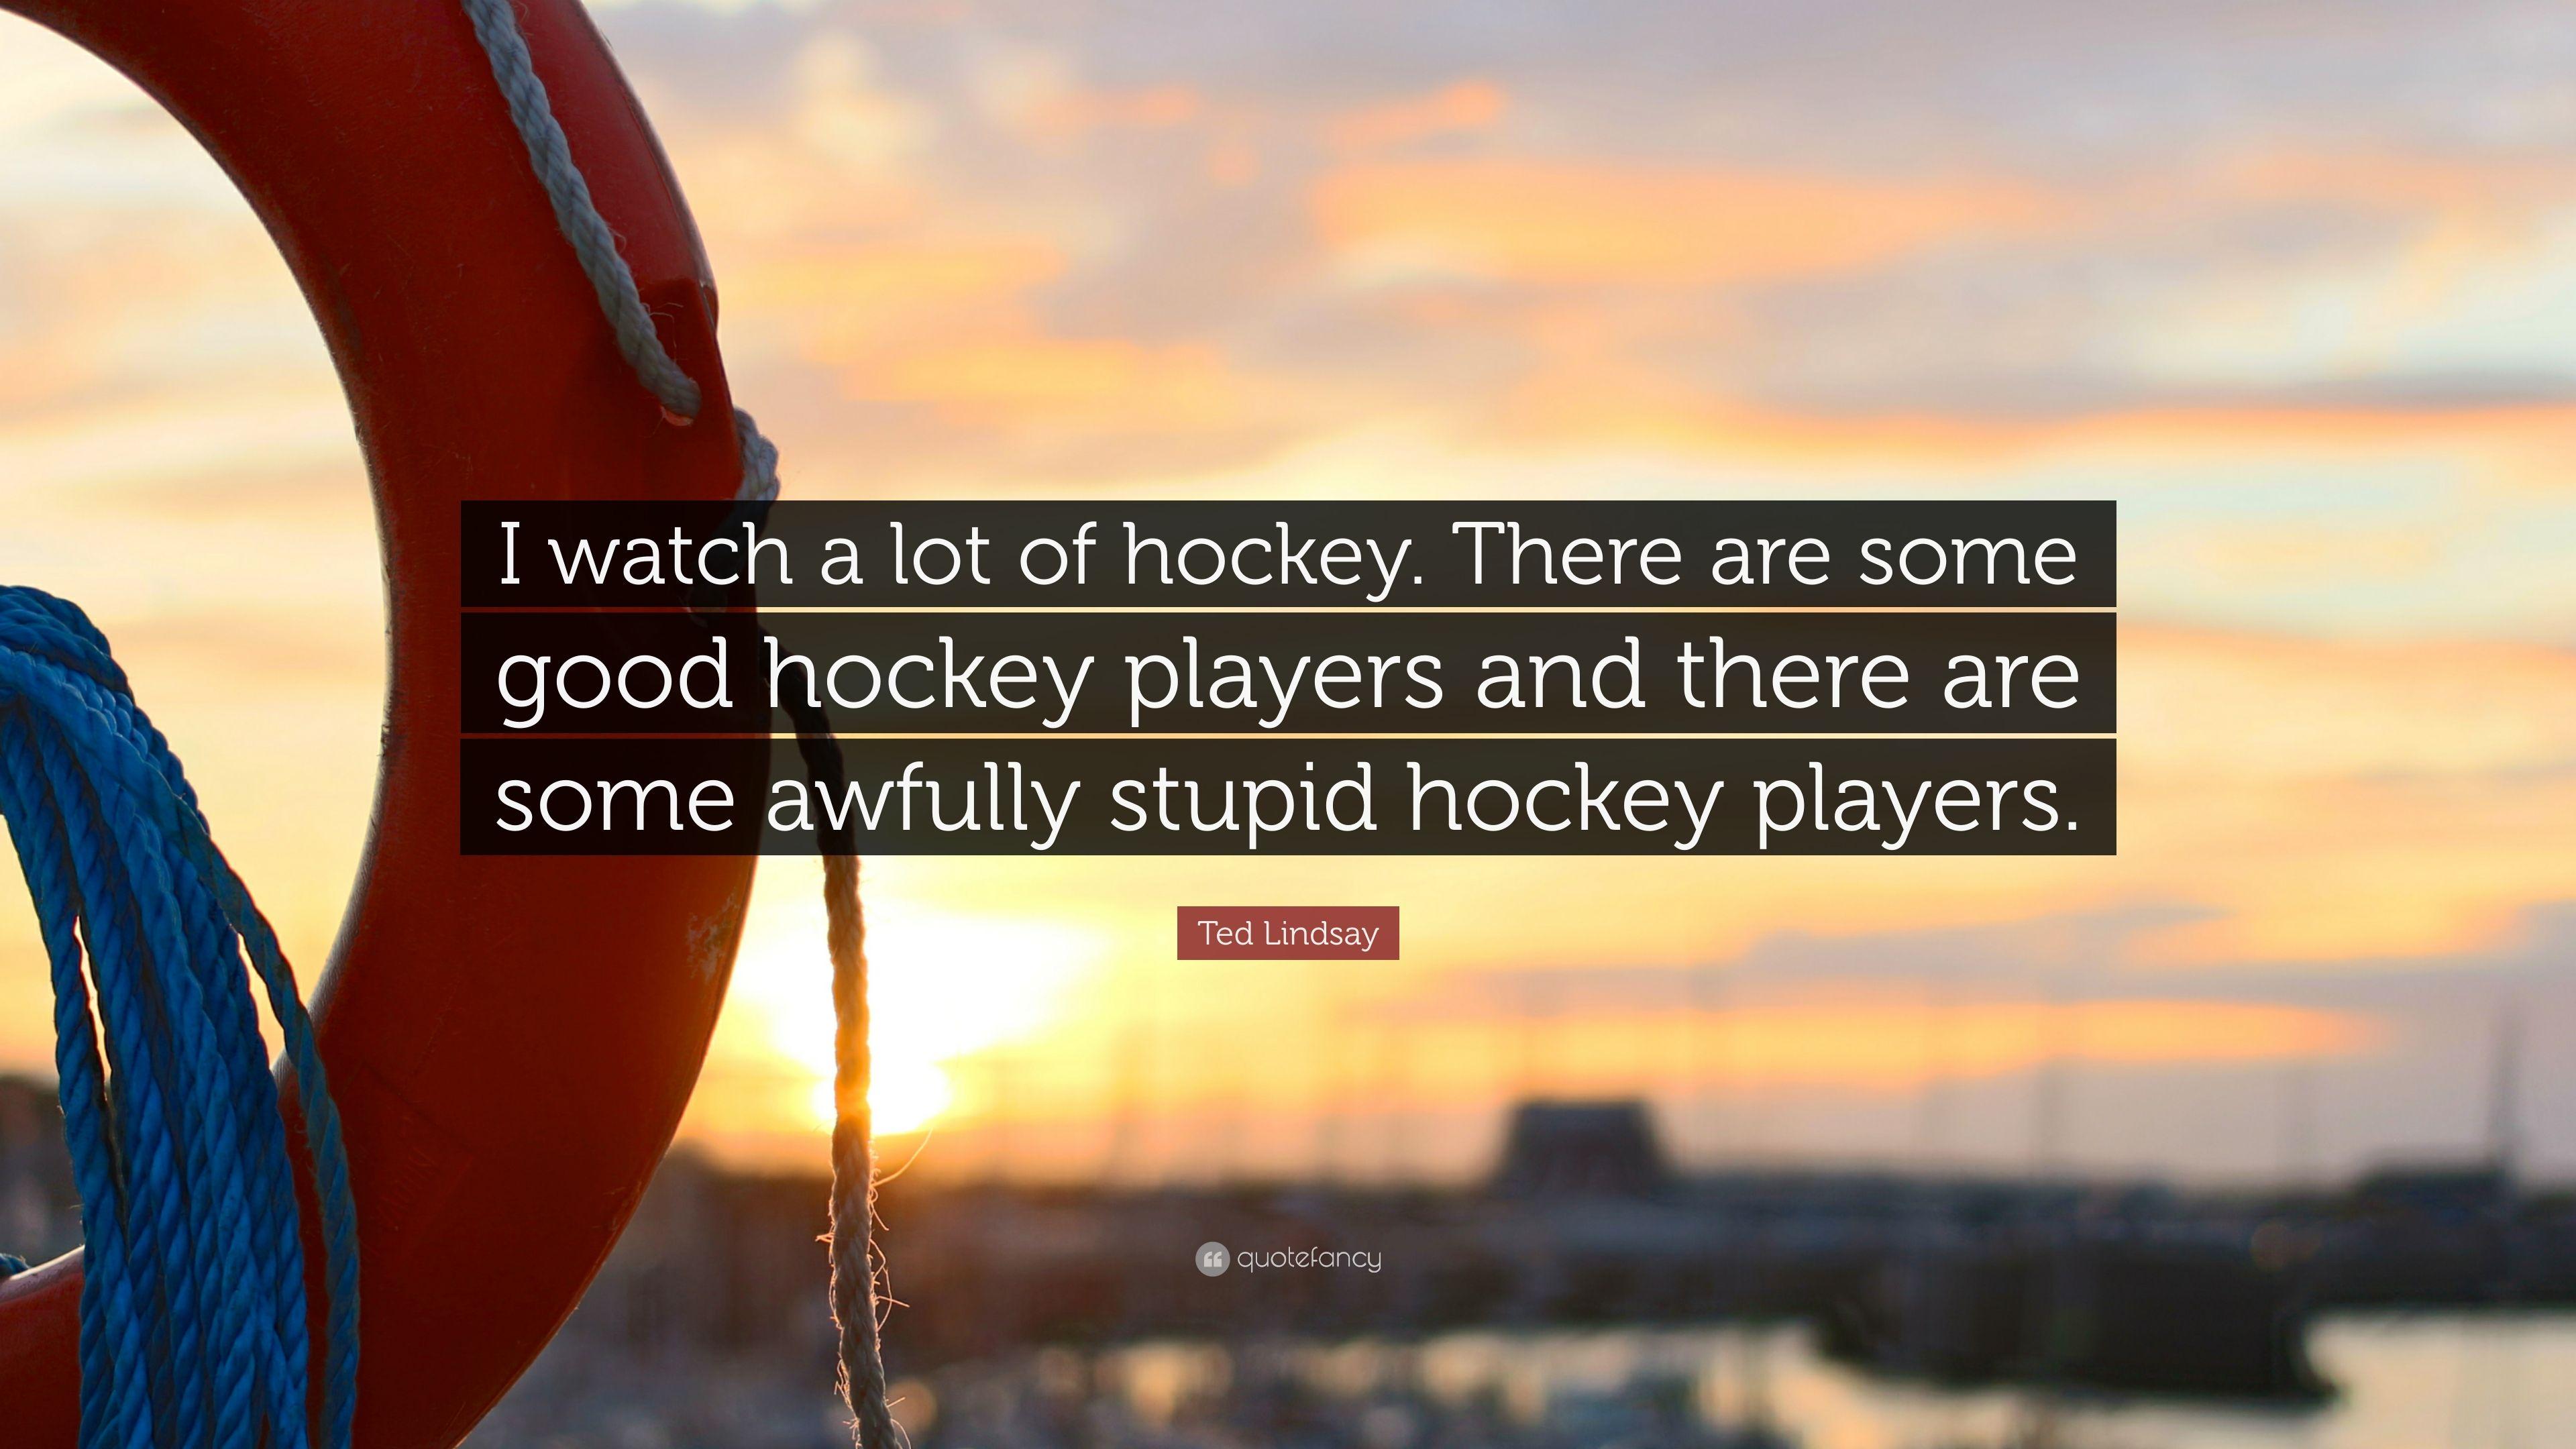 Ted Lindsay Quote: “I watch a lot of hockey. There are some good